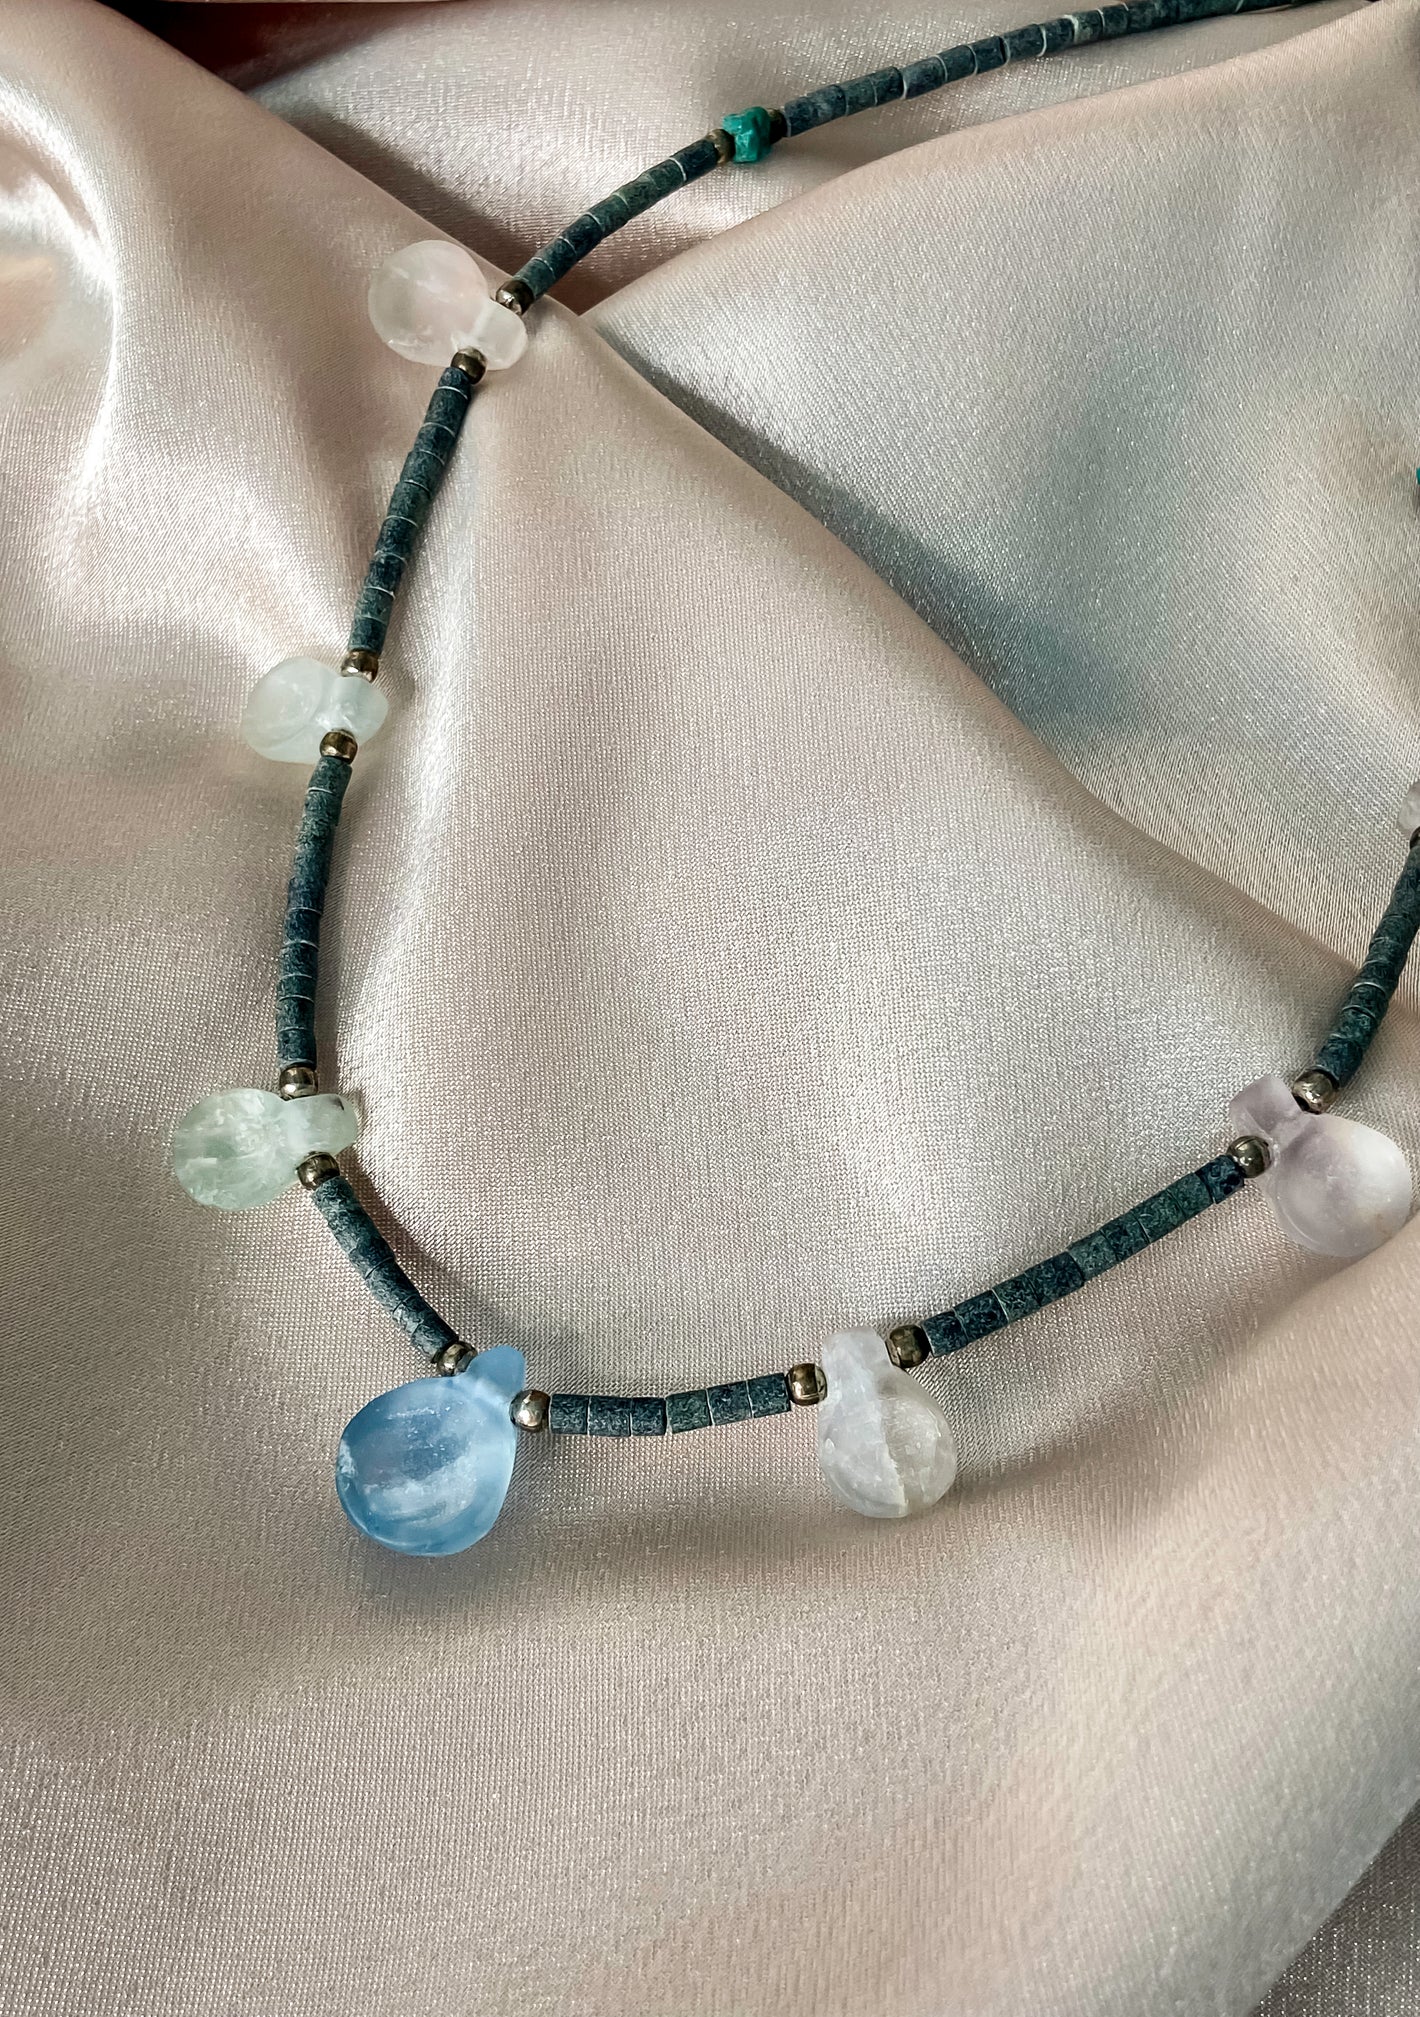 Handcrafted beaded necklace made using carved crystal quartz, turquoise, silver balls, and granite cylinder beads